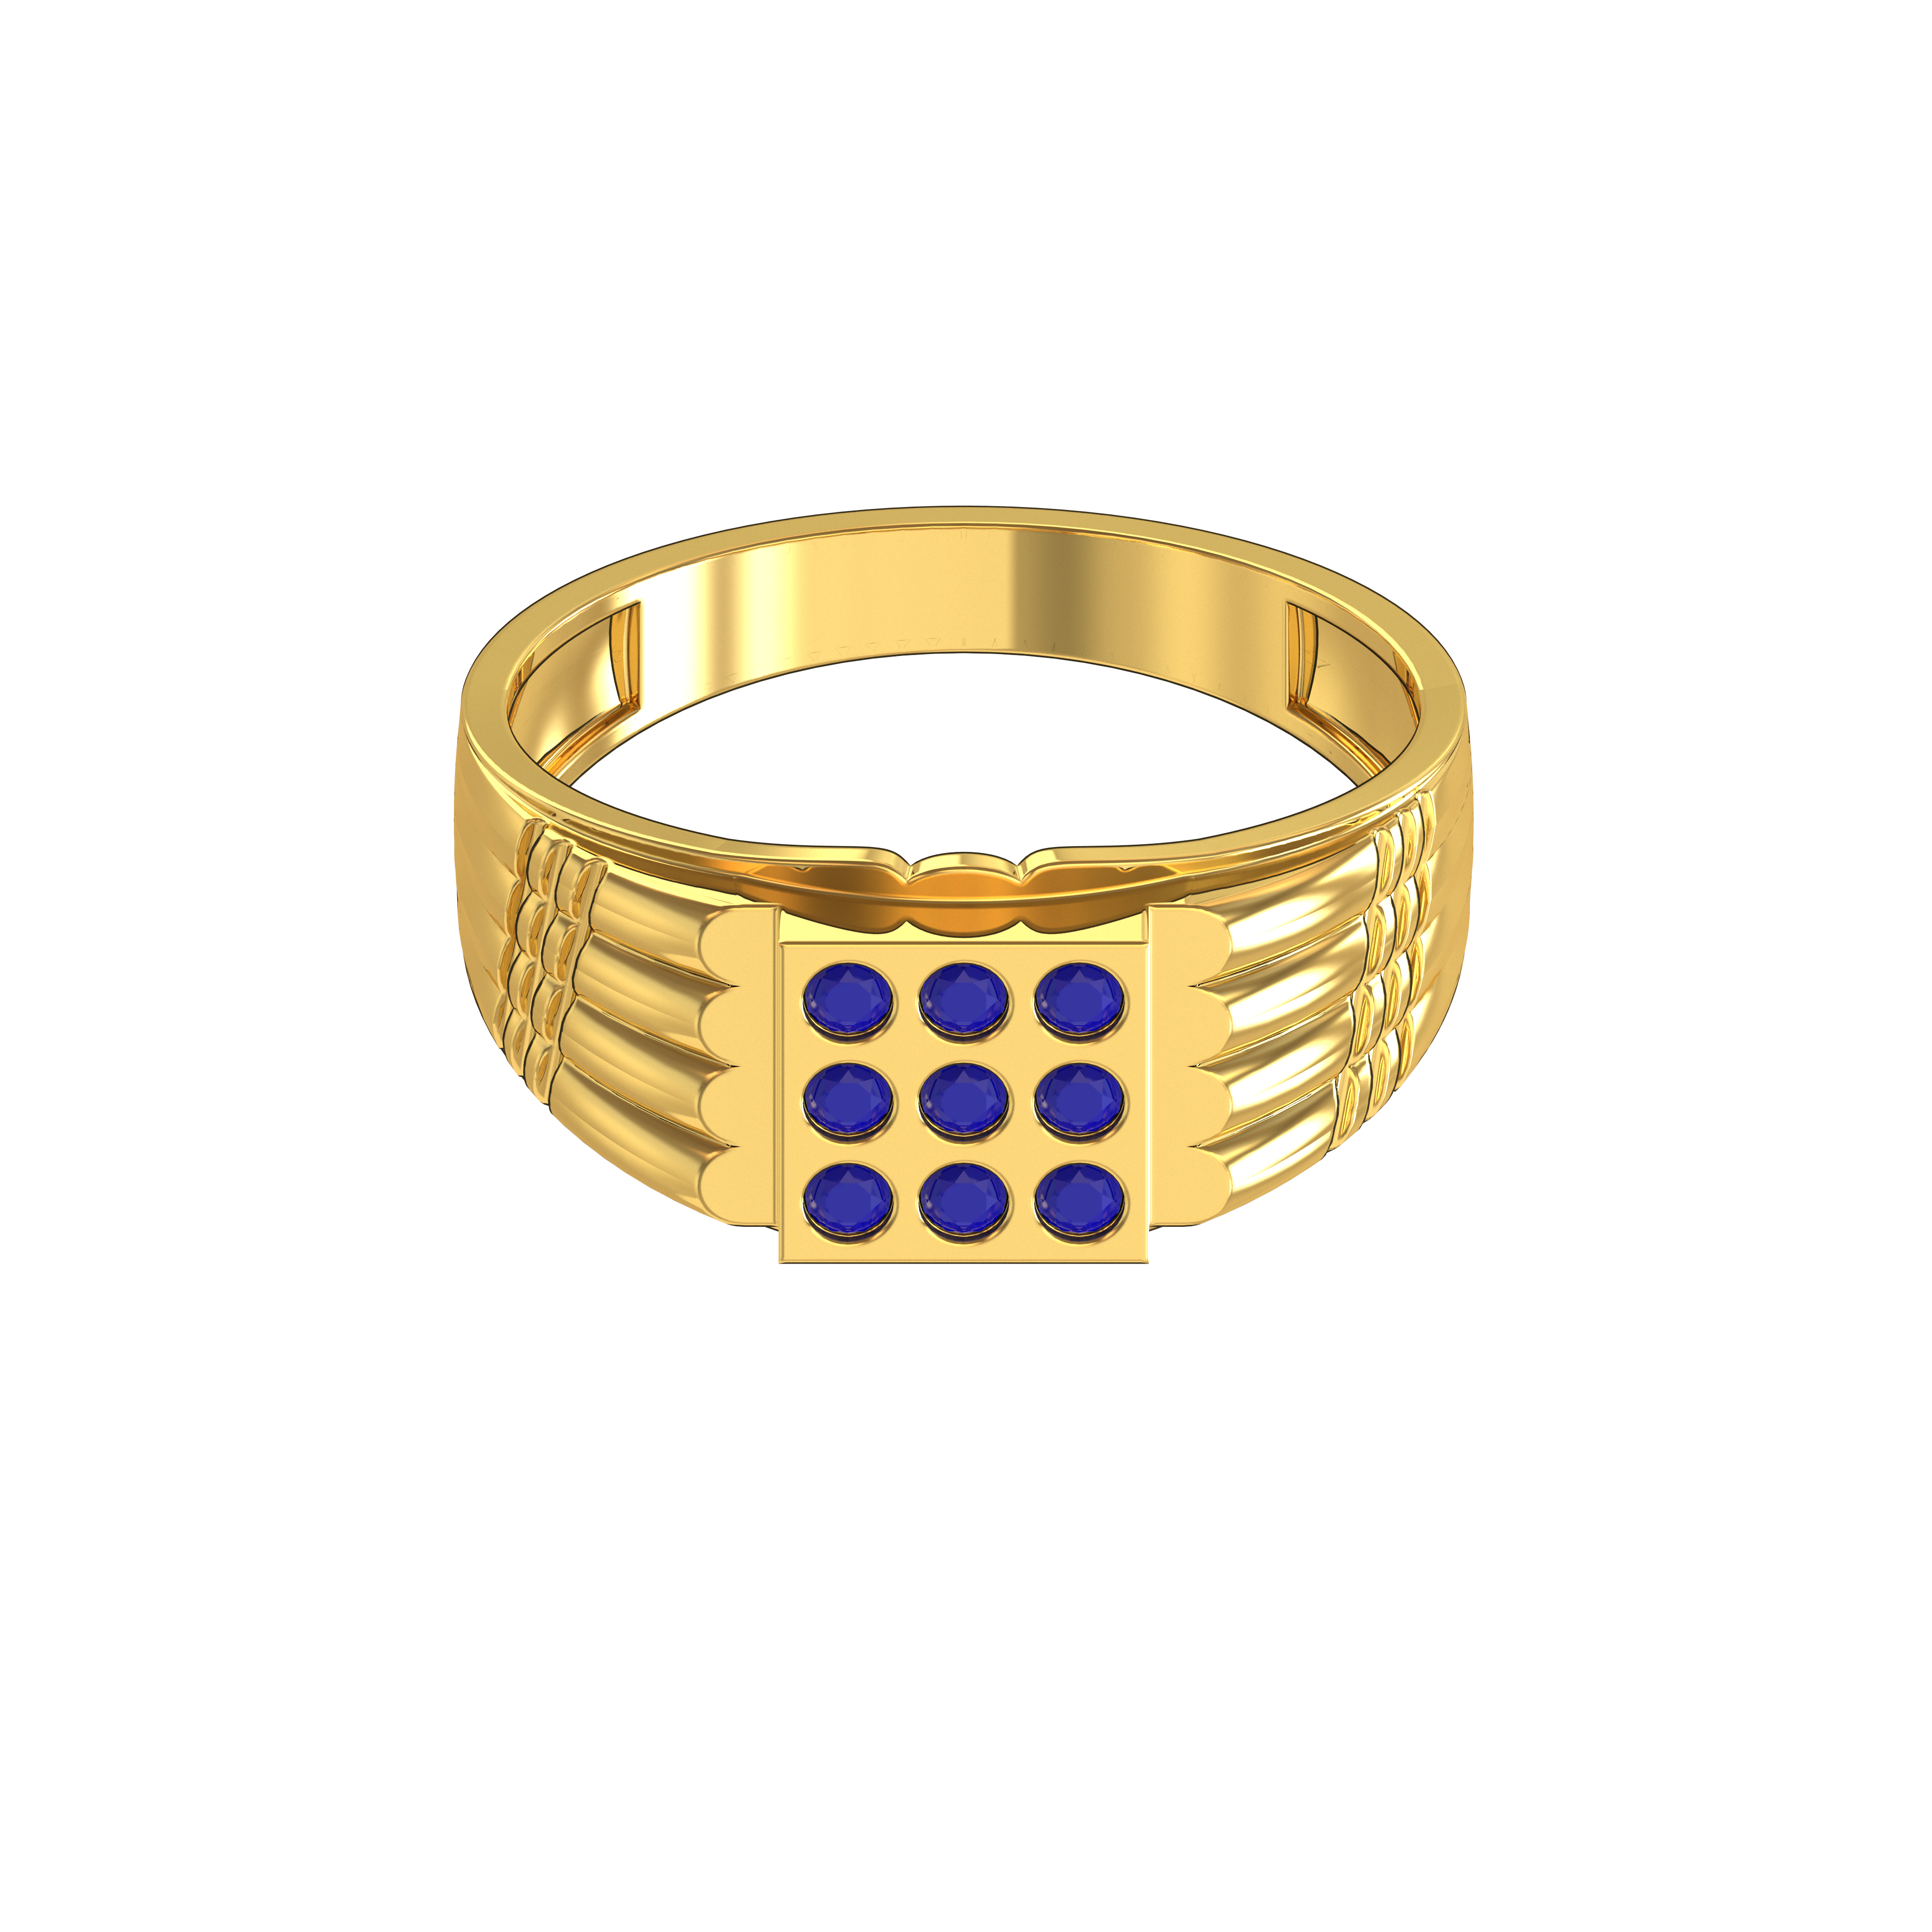 Boys ring design in gold, gents gold ring, Top 15 designs - YouTube-vachngandaiphat.com.vn